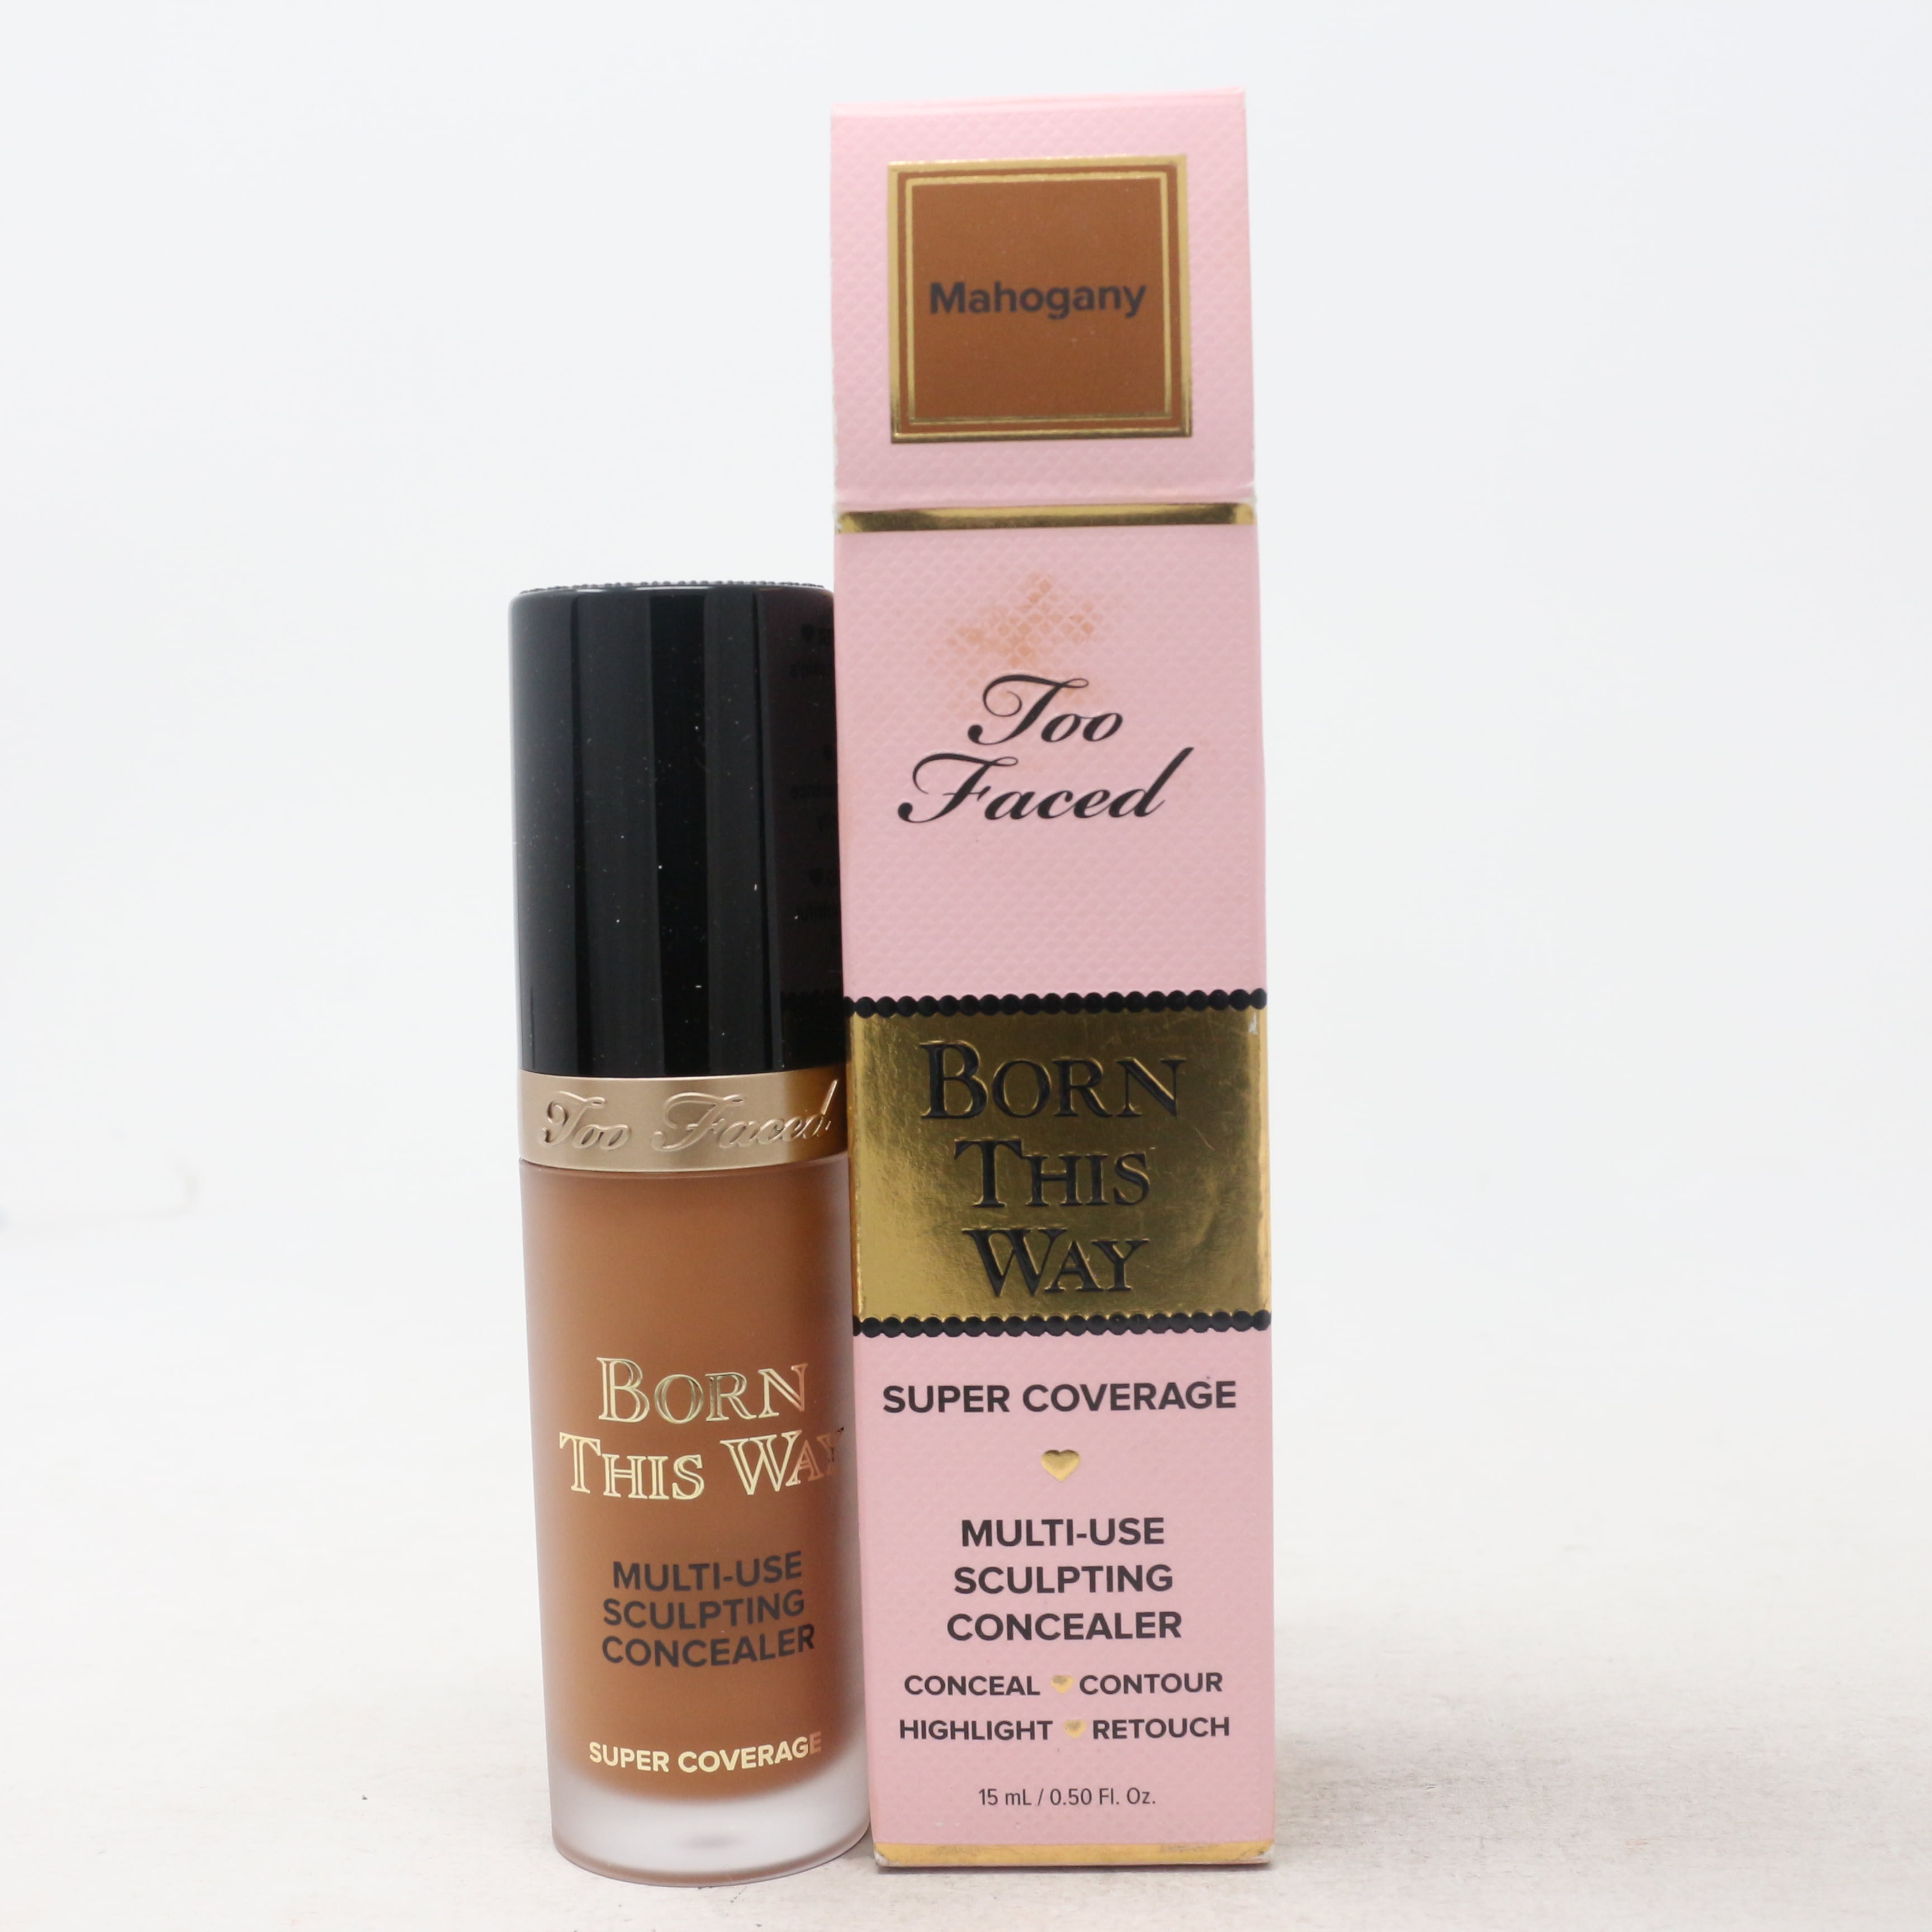 Too Faced Born This Way Super Coverage Concealer 0.5oz Mahogany New With Box